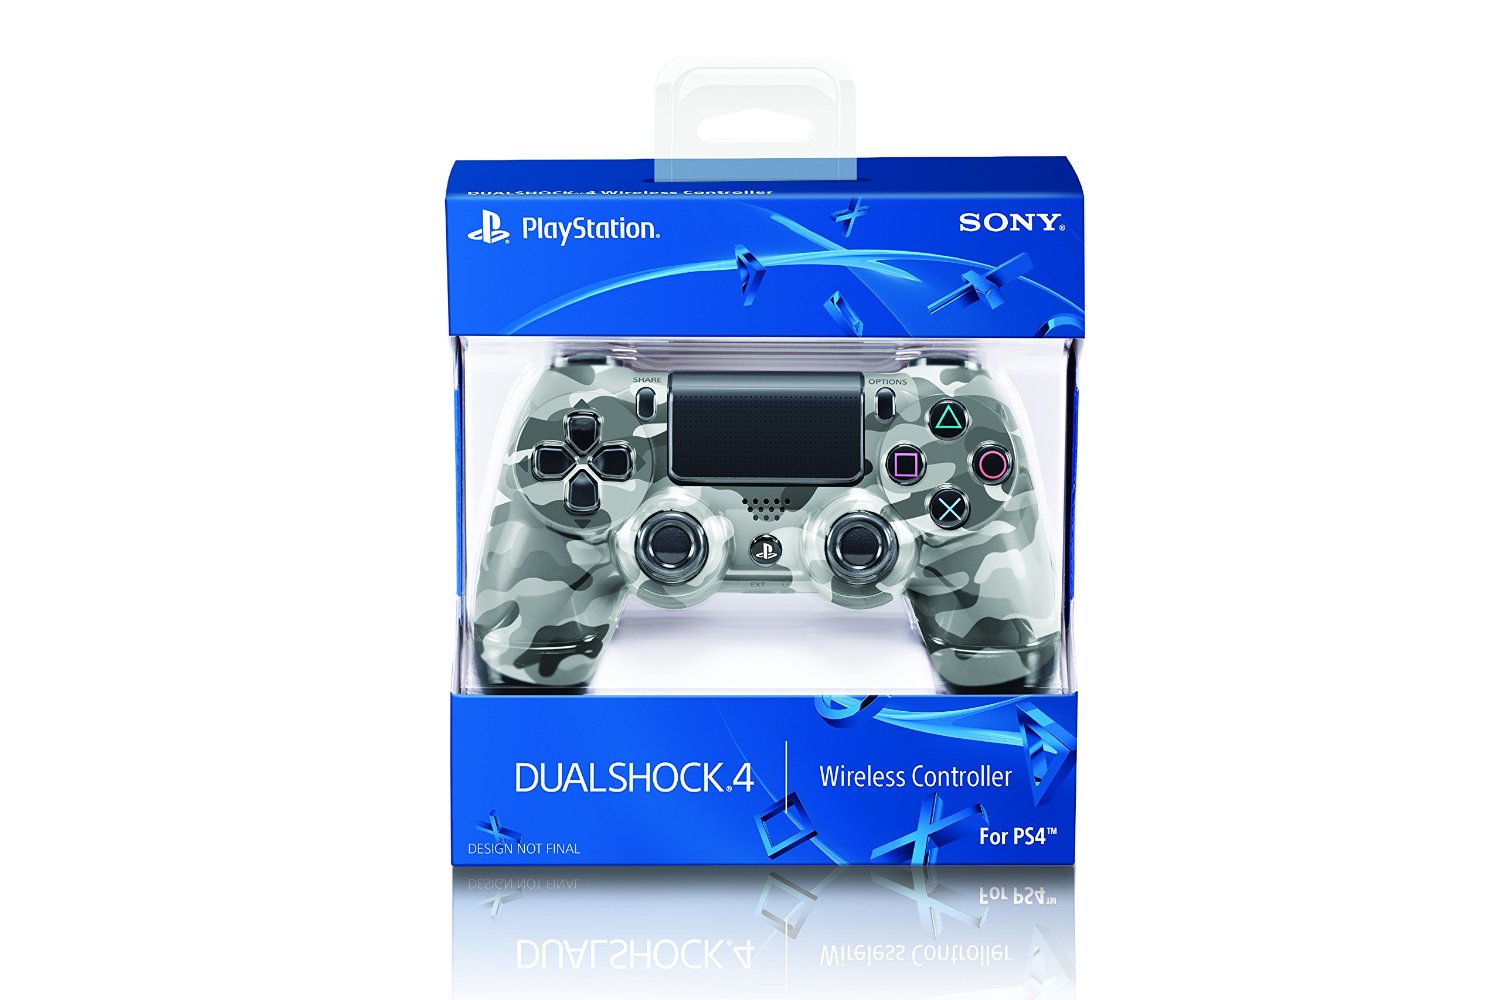 DualShock 4 Wireless Controller for PlayStation 4 - Urban Camouf